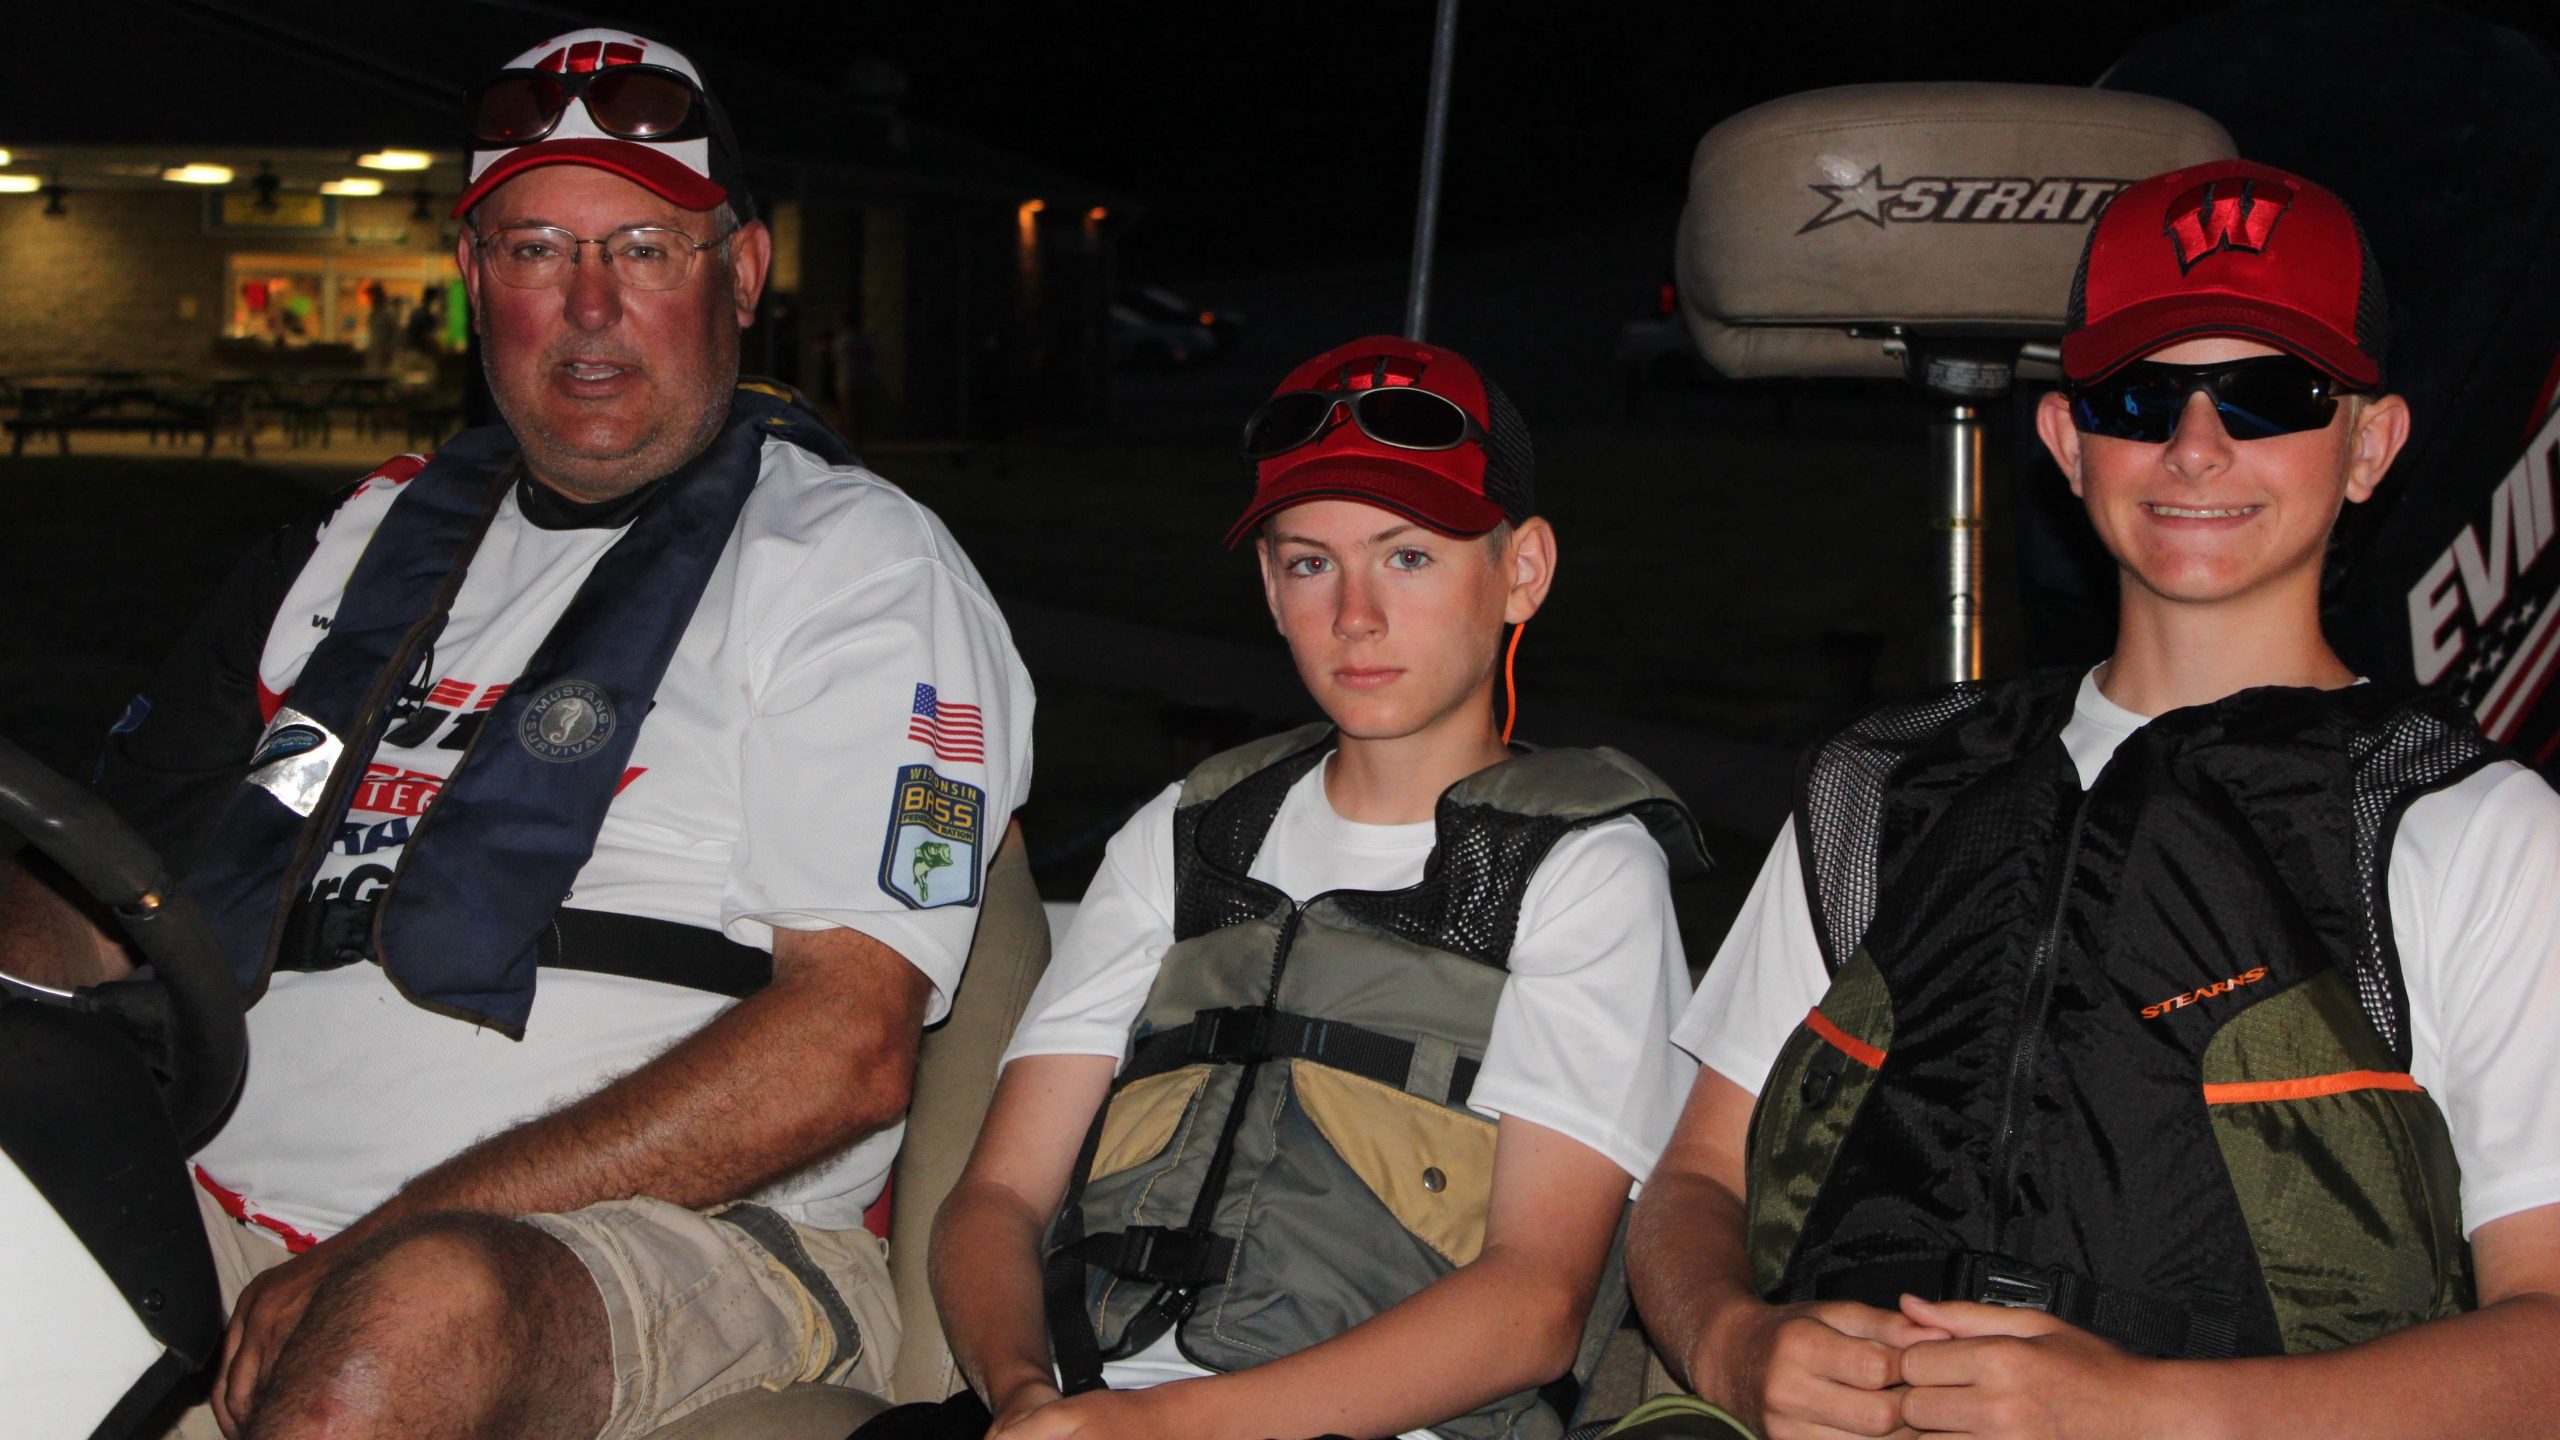 Team Wisconsin is ready to fish. That's Dylan Haney in the middle and Austin Haney at right in the pre-dawn sunglasses.